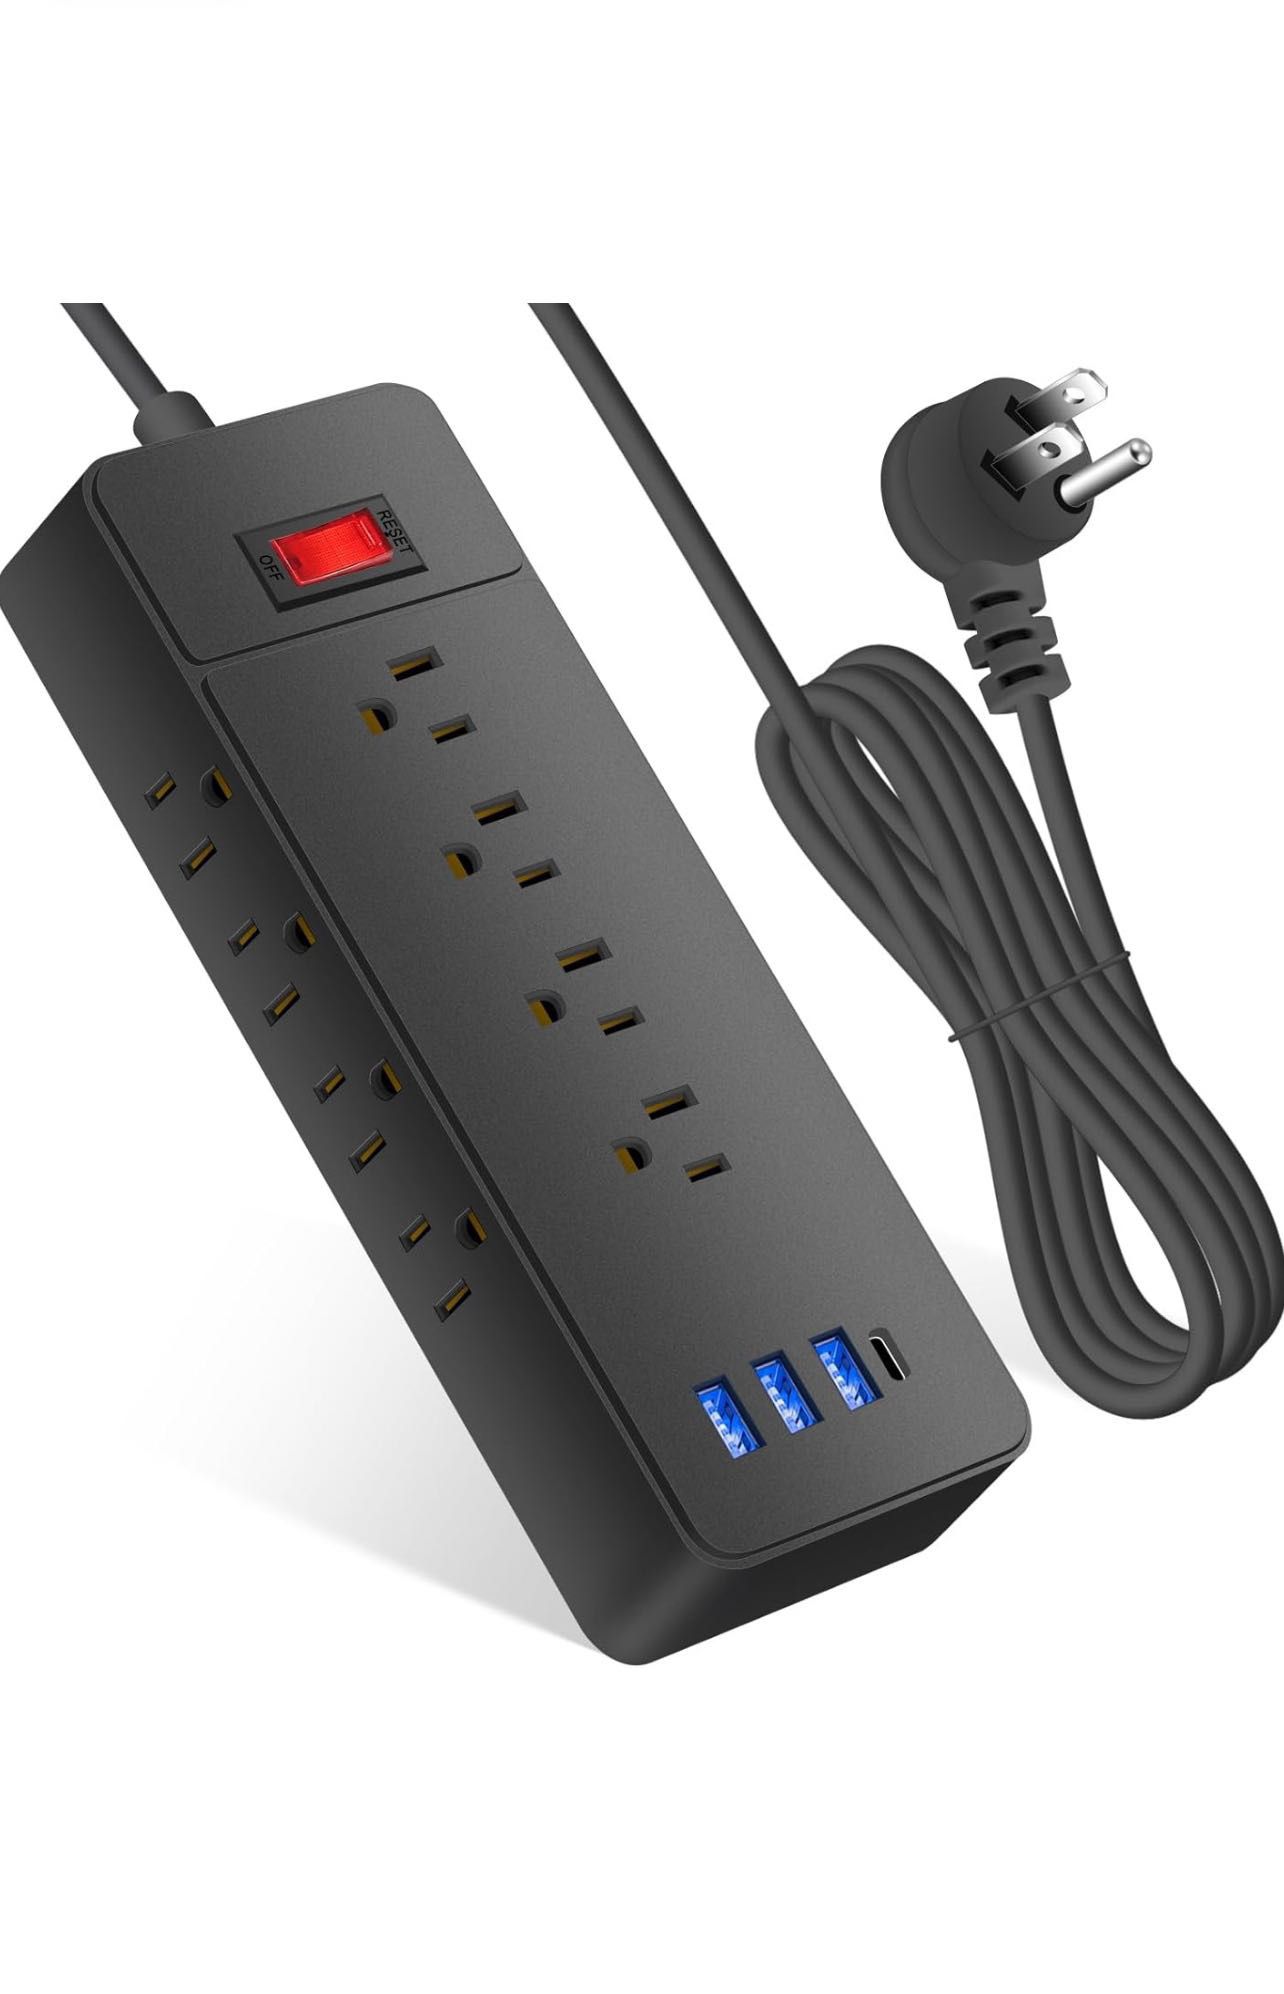 Power Strip Surge Protector Speaker - 12 Widely Spaced Outlets 4 USB Charging Ports(Built-in LED Light), 1700J Flat Plug with 6 Feet Power Cord, Overl